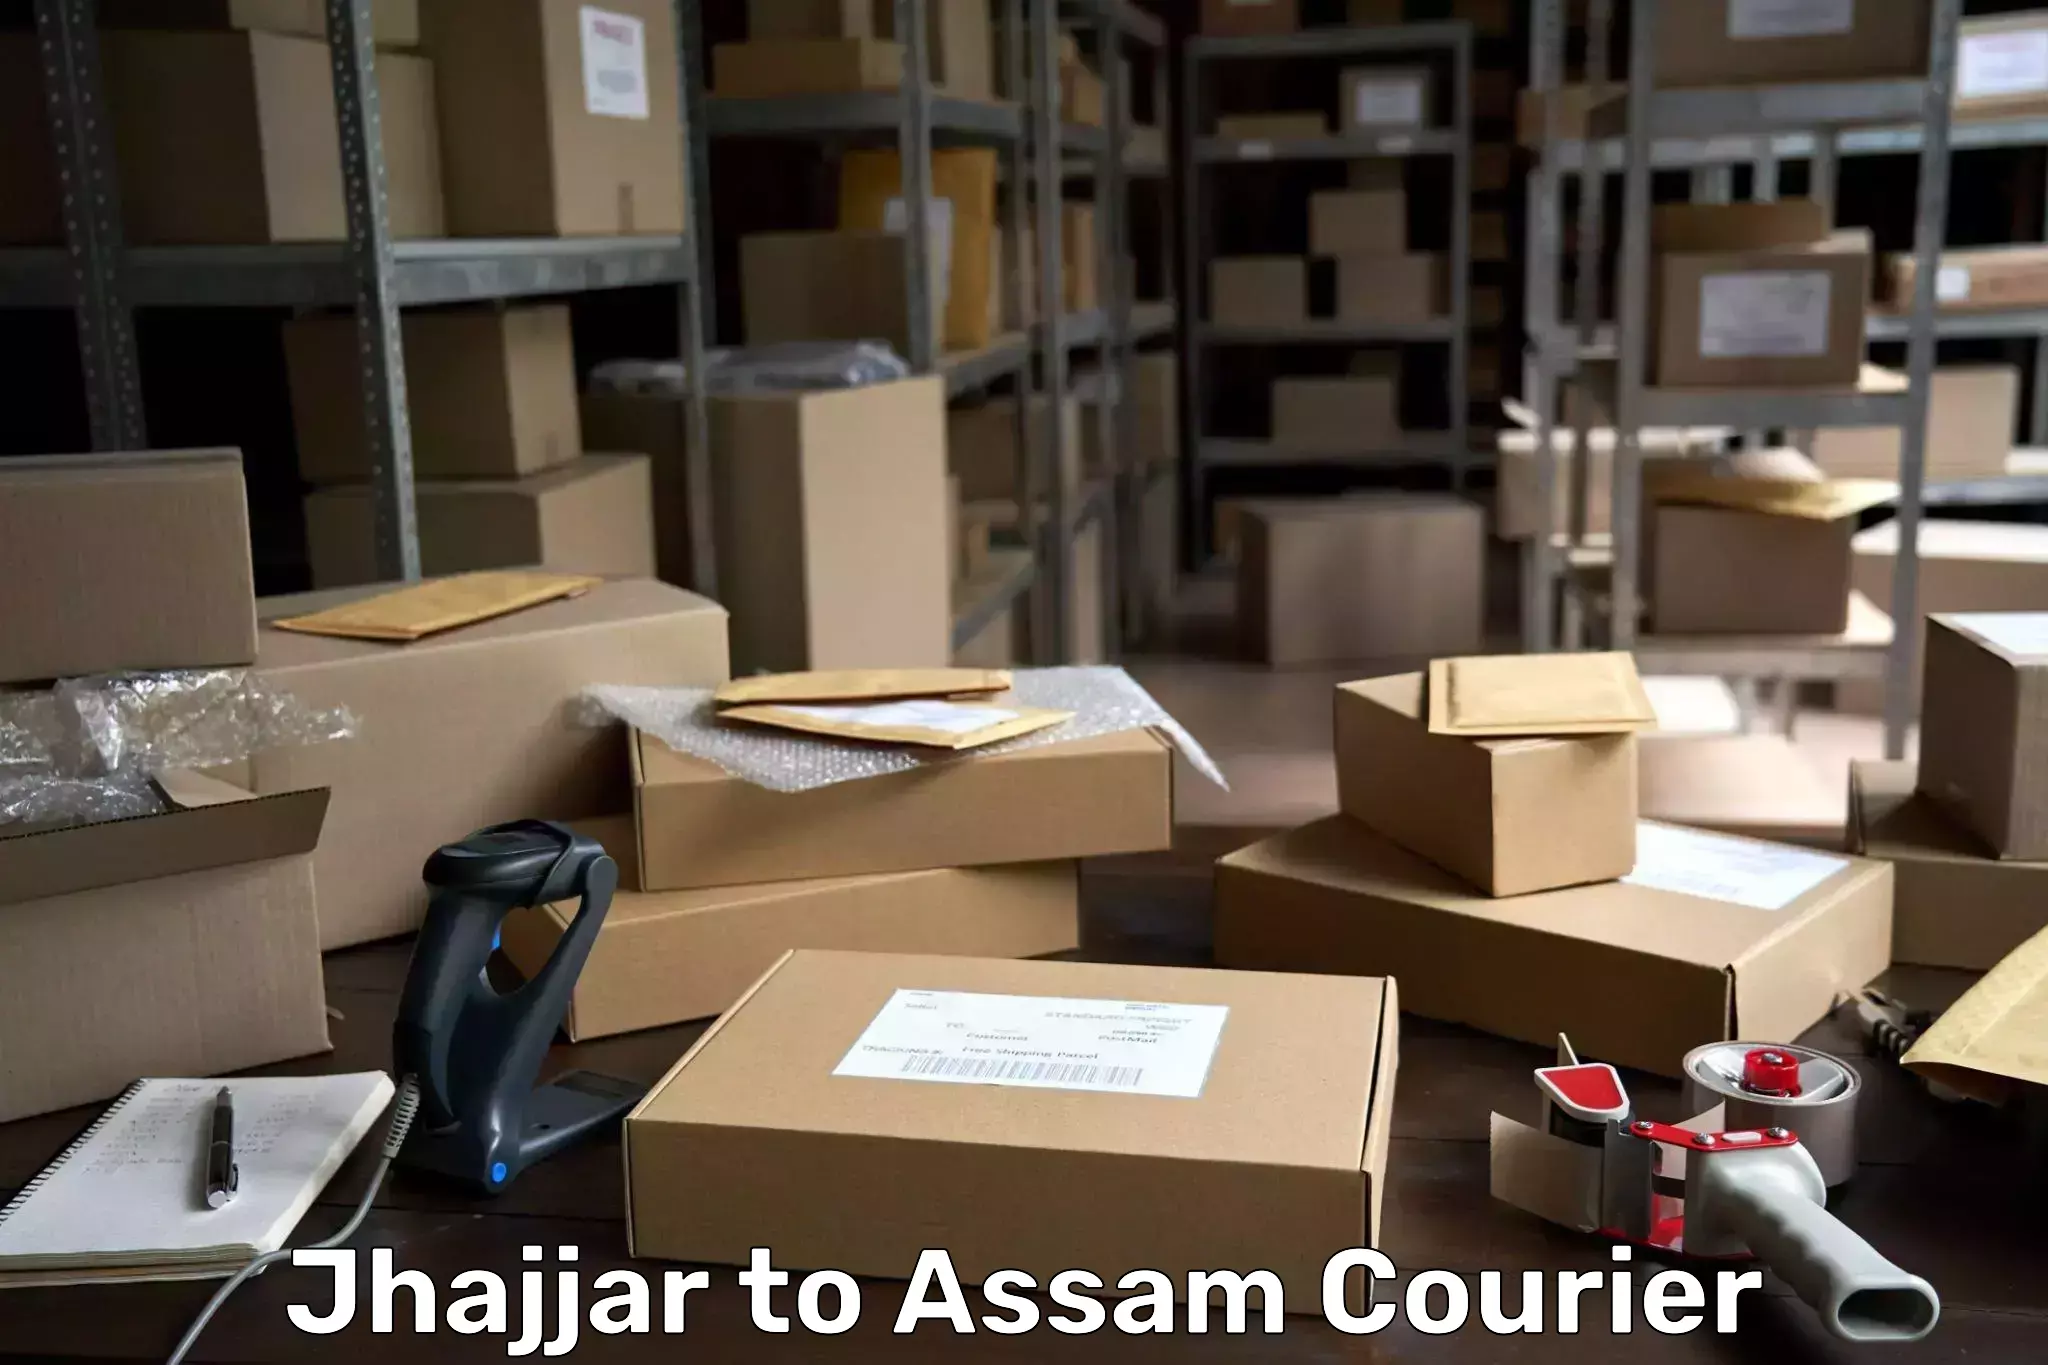 Sustainable shipping practices Jhajjar to Lala Assam